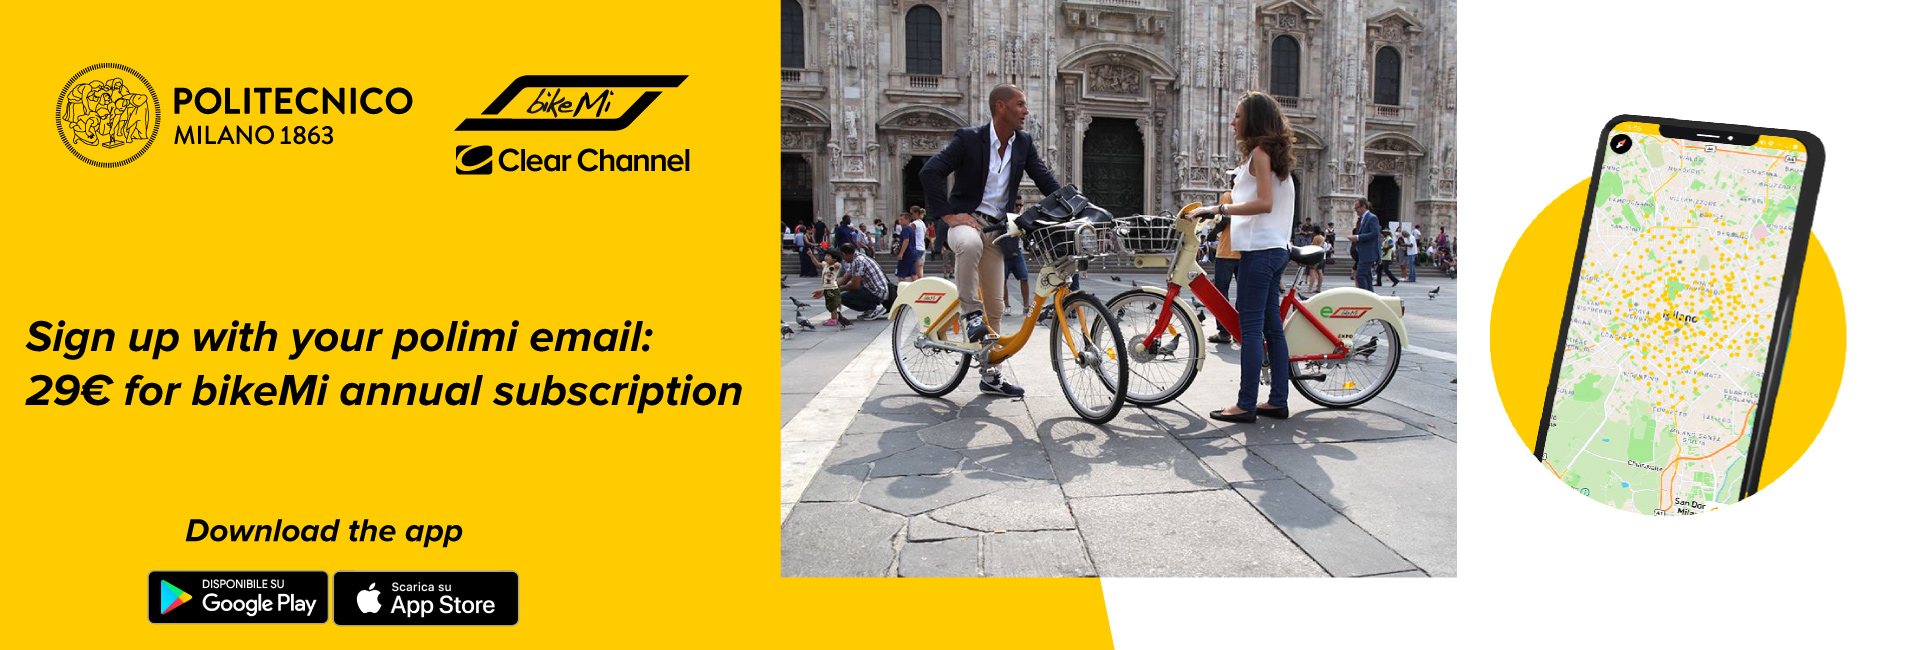 Sign up with your polimi email: 29€ for BikeMI annual subscription